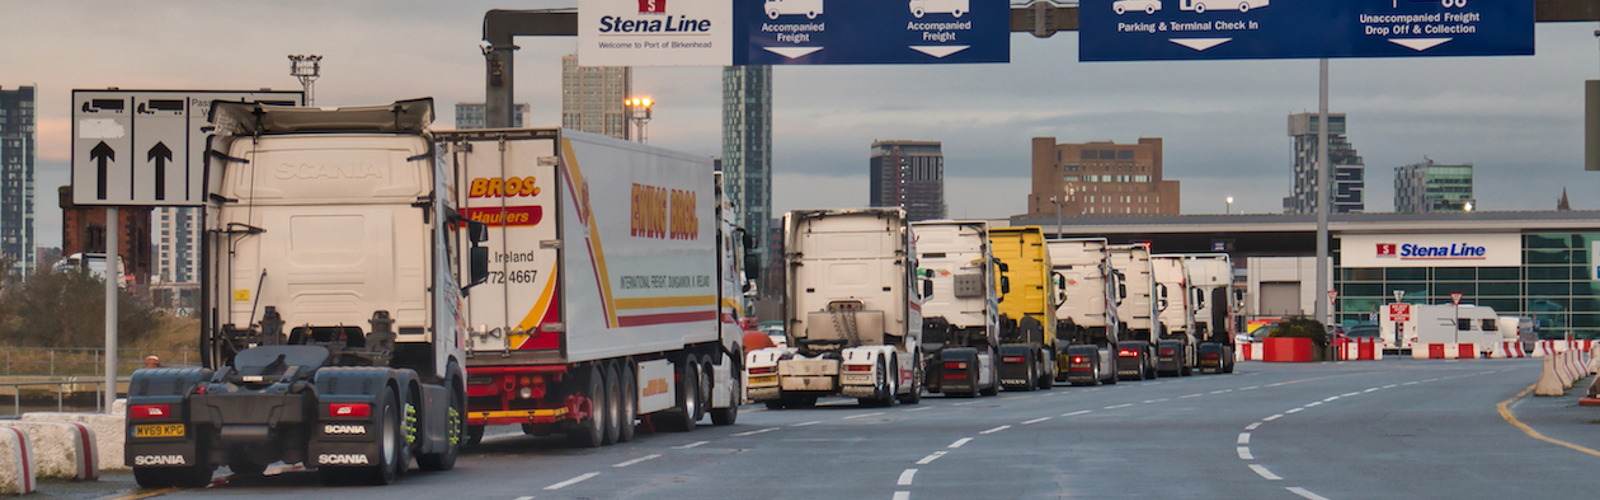 Wirral, UK - Feb 6 2021: Lorry tractor units queuing at the Stena Line roll on-roll off Liverpool to Belfast ferry terminal in Birkenhead on the River Mersey